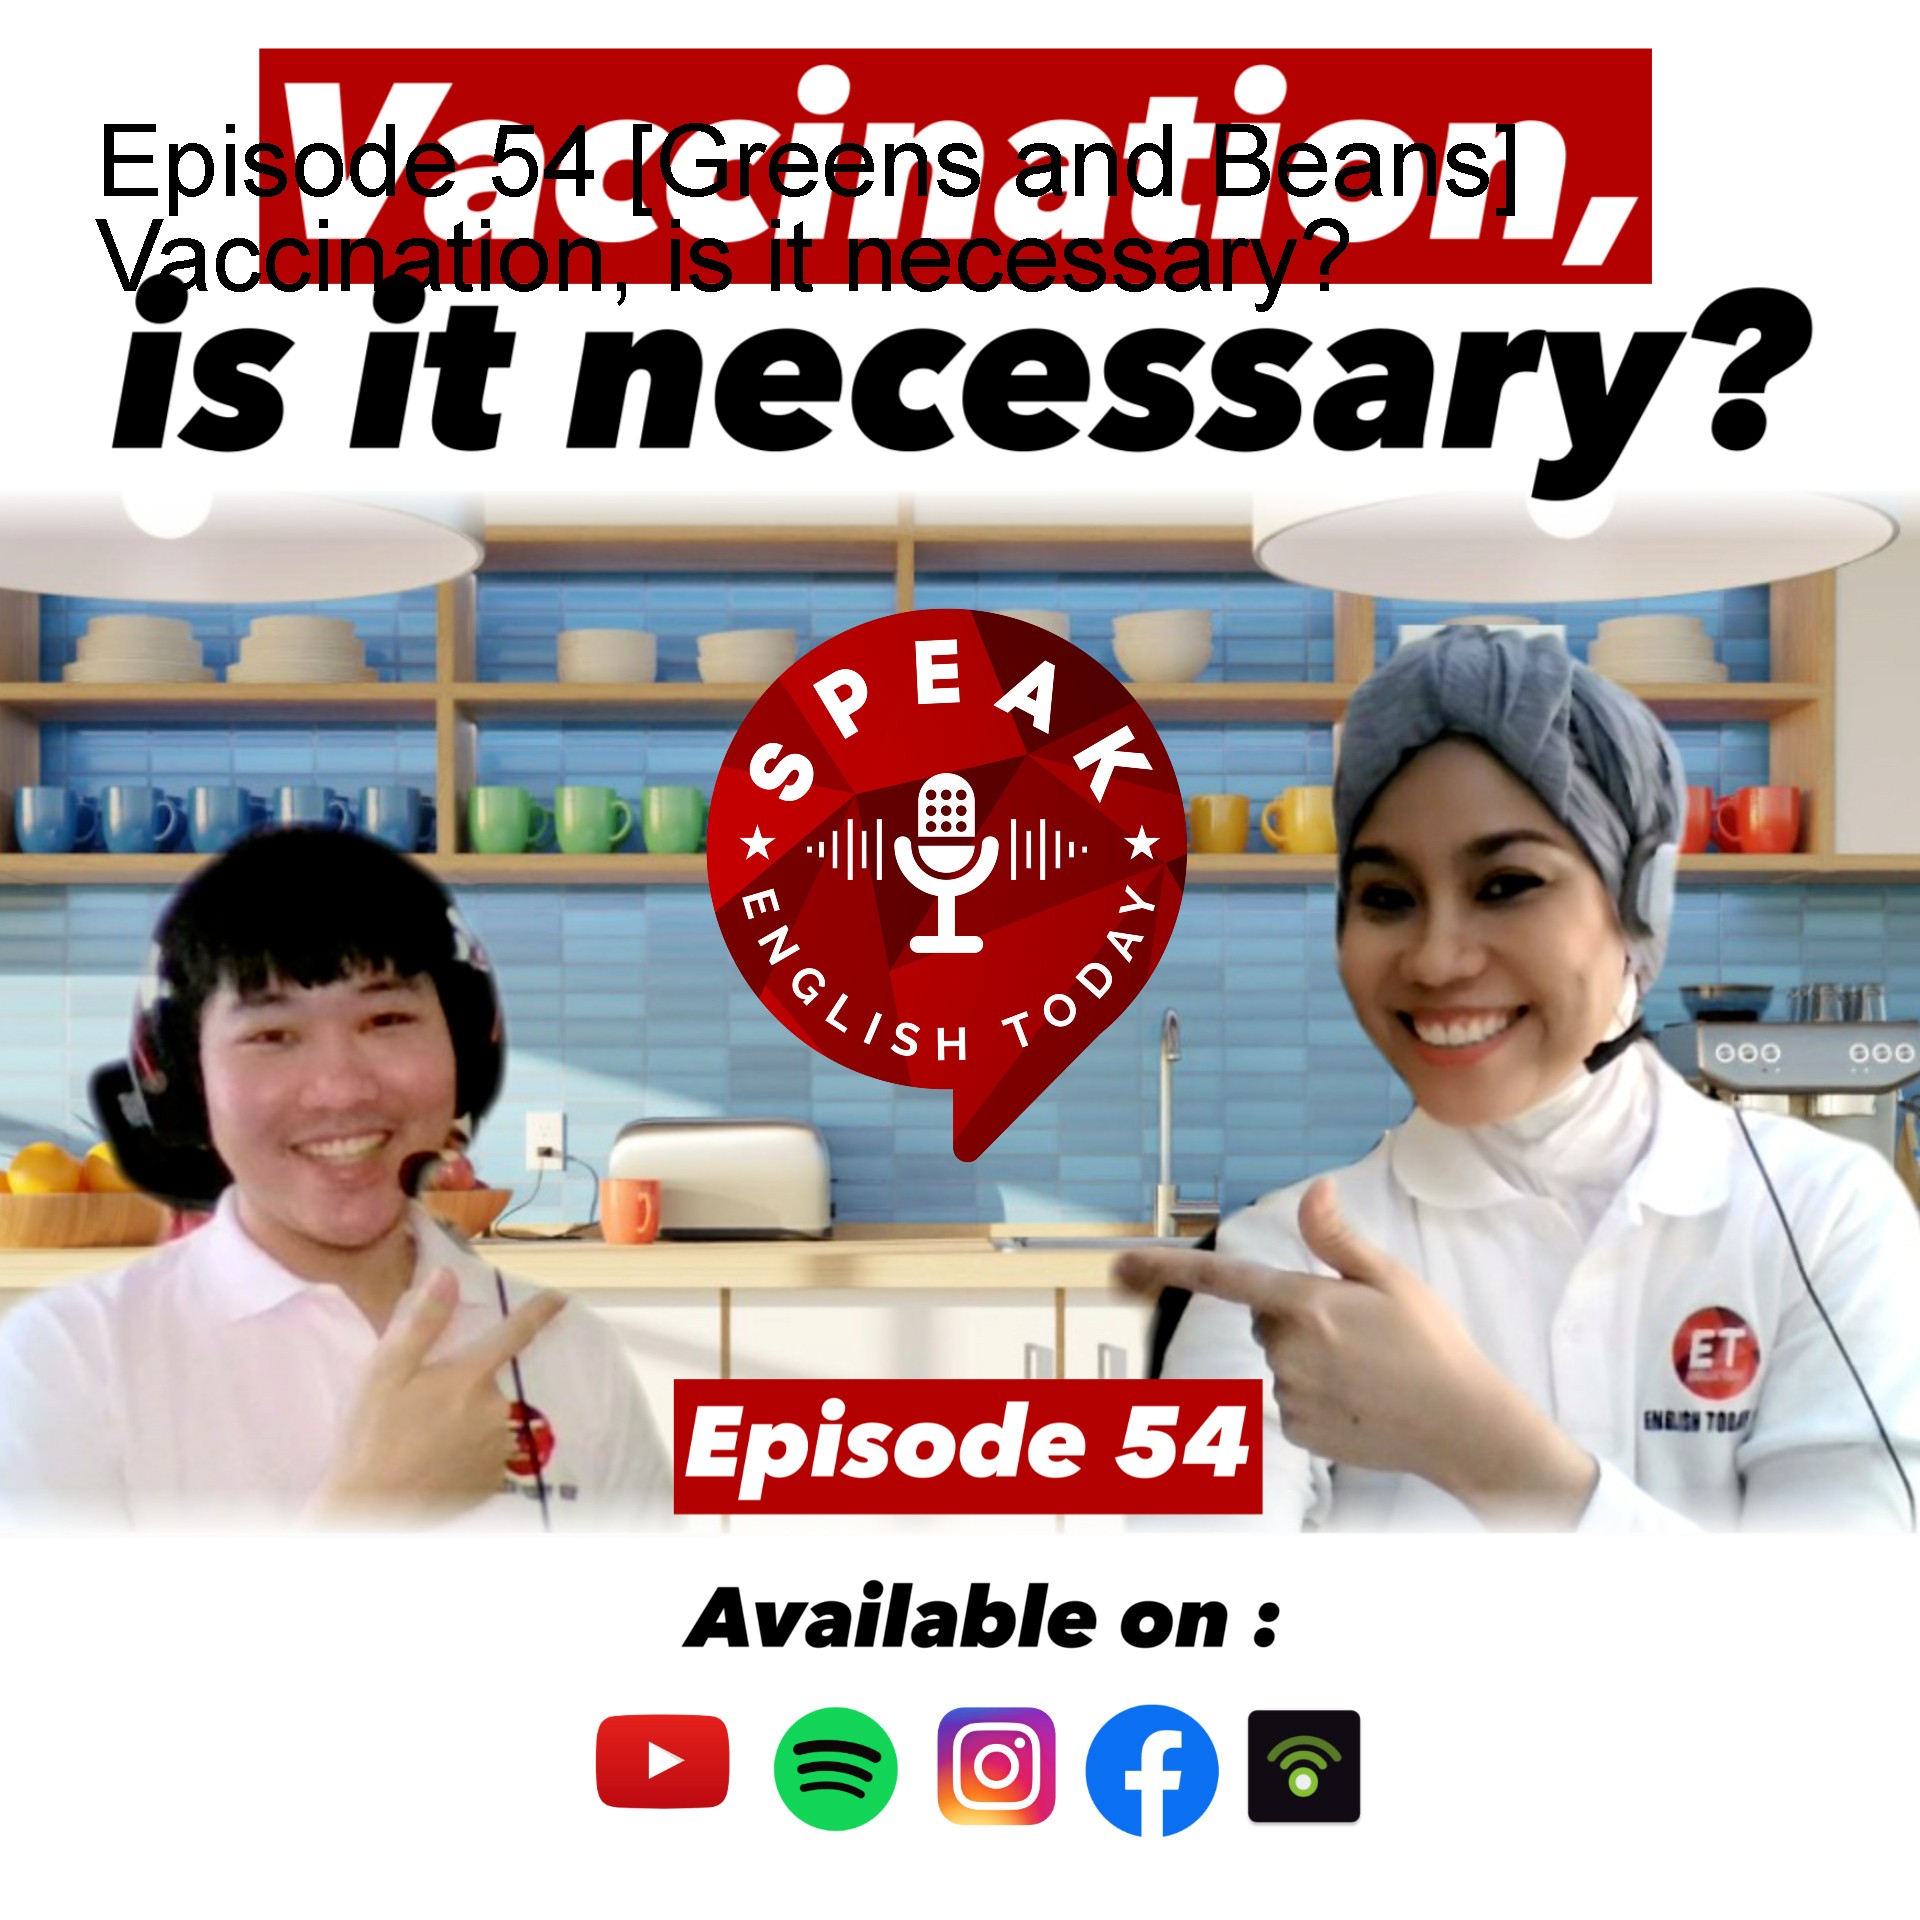 Episode 54 [Greens and Beans] Vaccination, is it necessary?